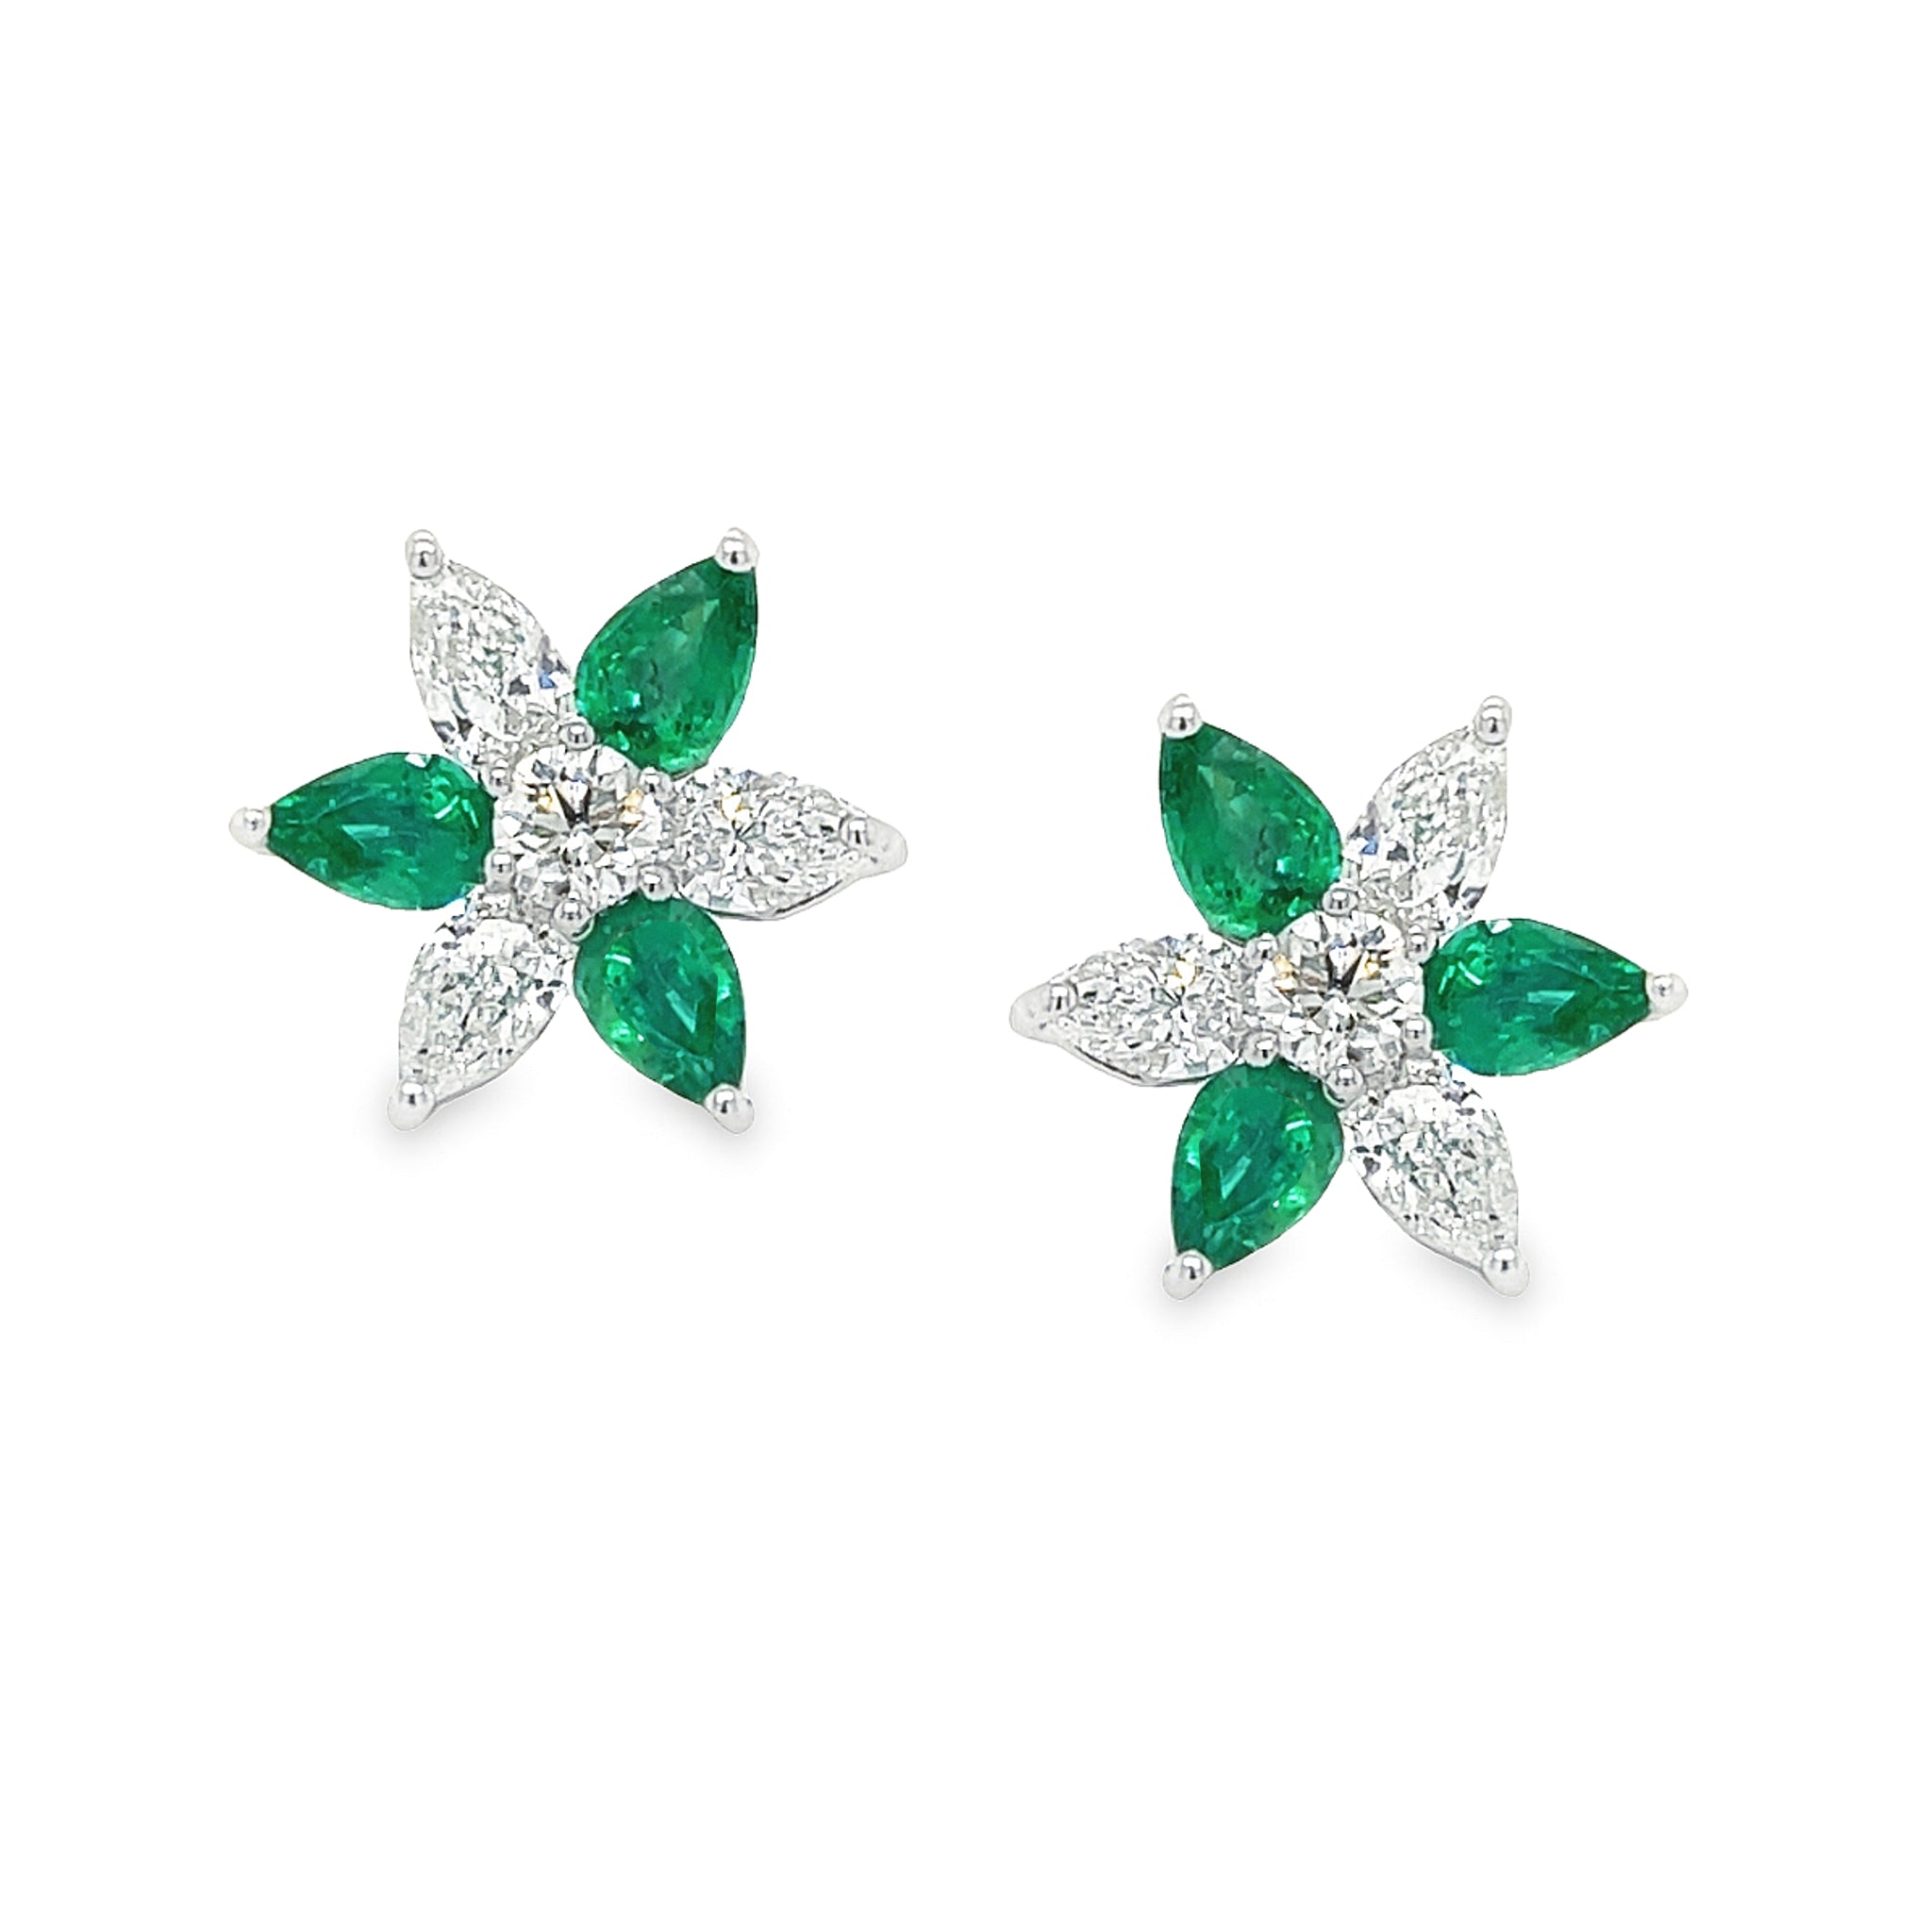 Diamond and Emerald Cluster Earrings